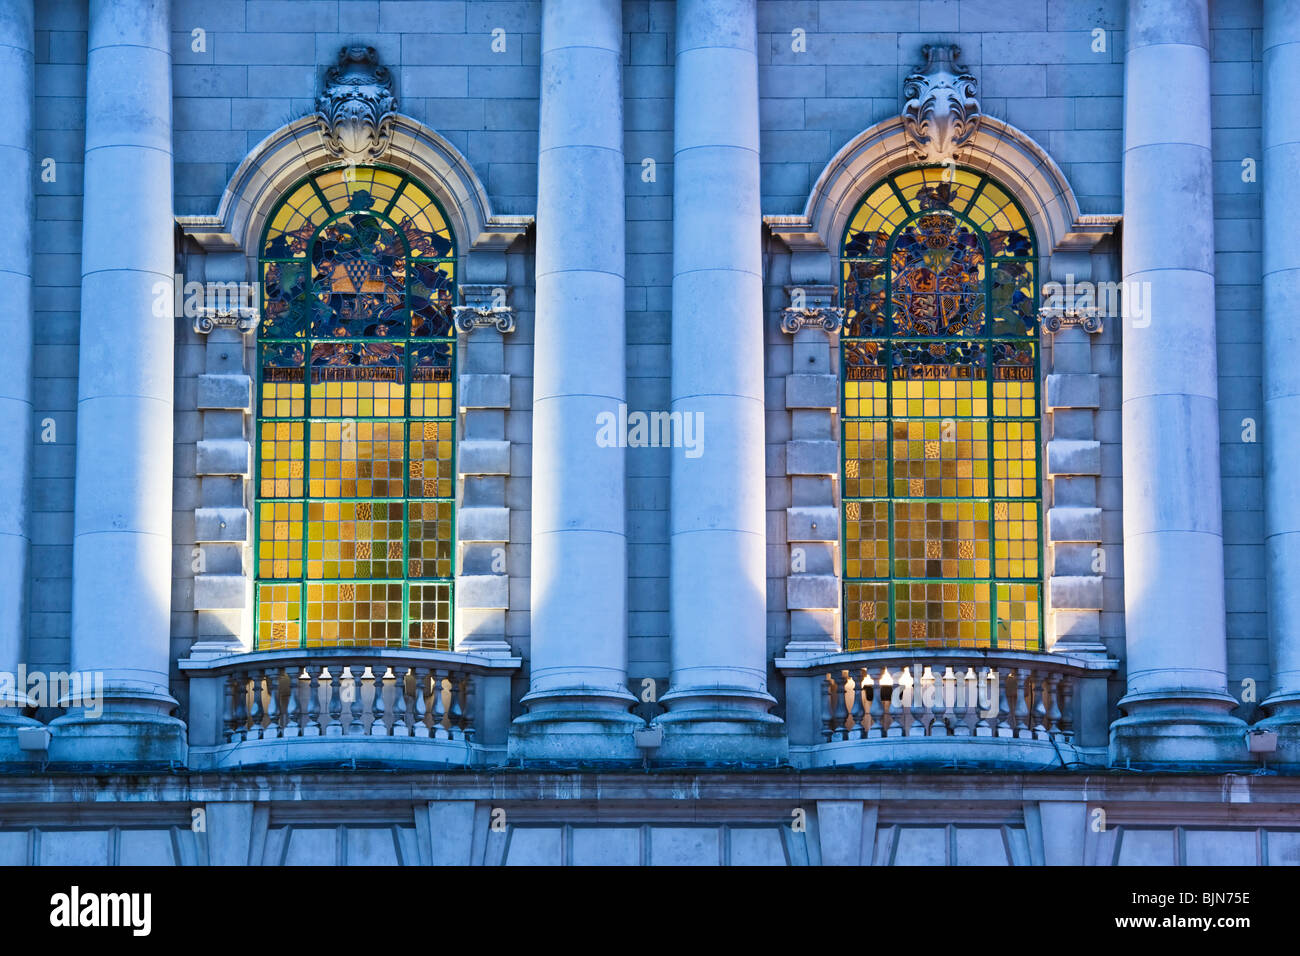 Stained glass windows on the exterior of Belfast City Hall, refurbished and reopened in 2009, Belfast, Northern Ireland Stock Photo